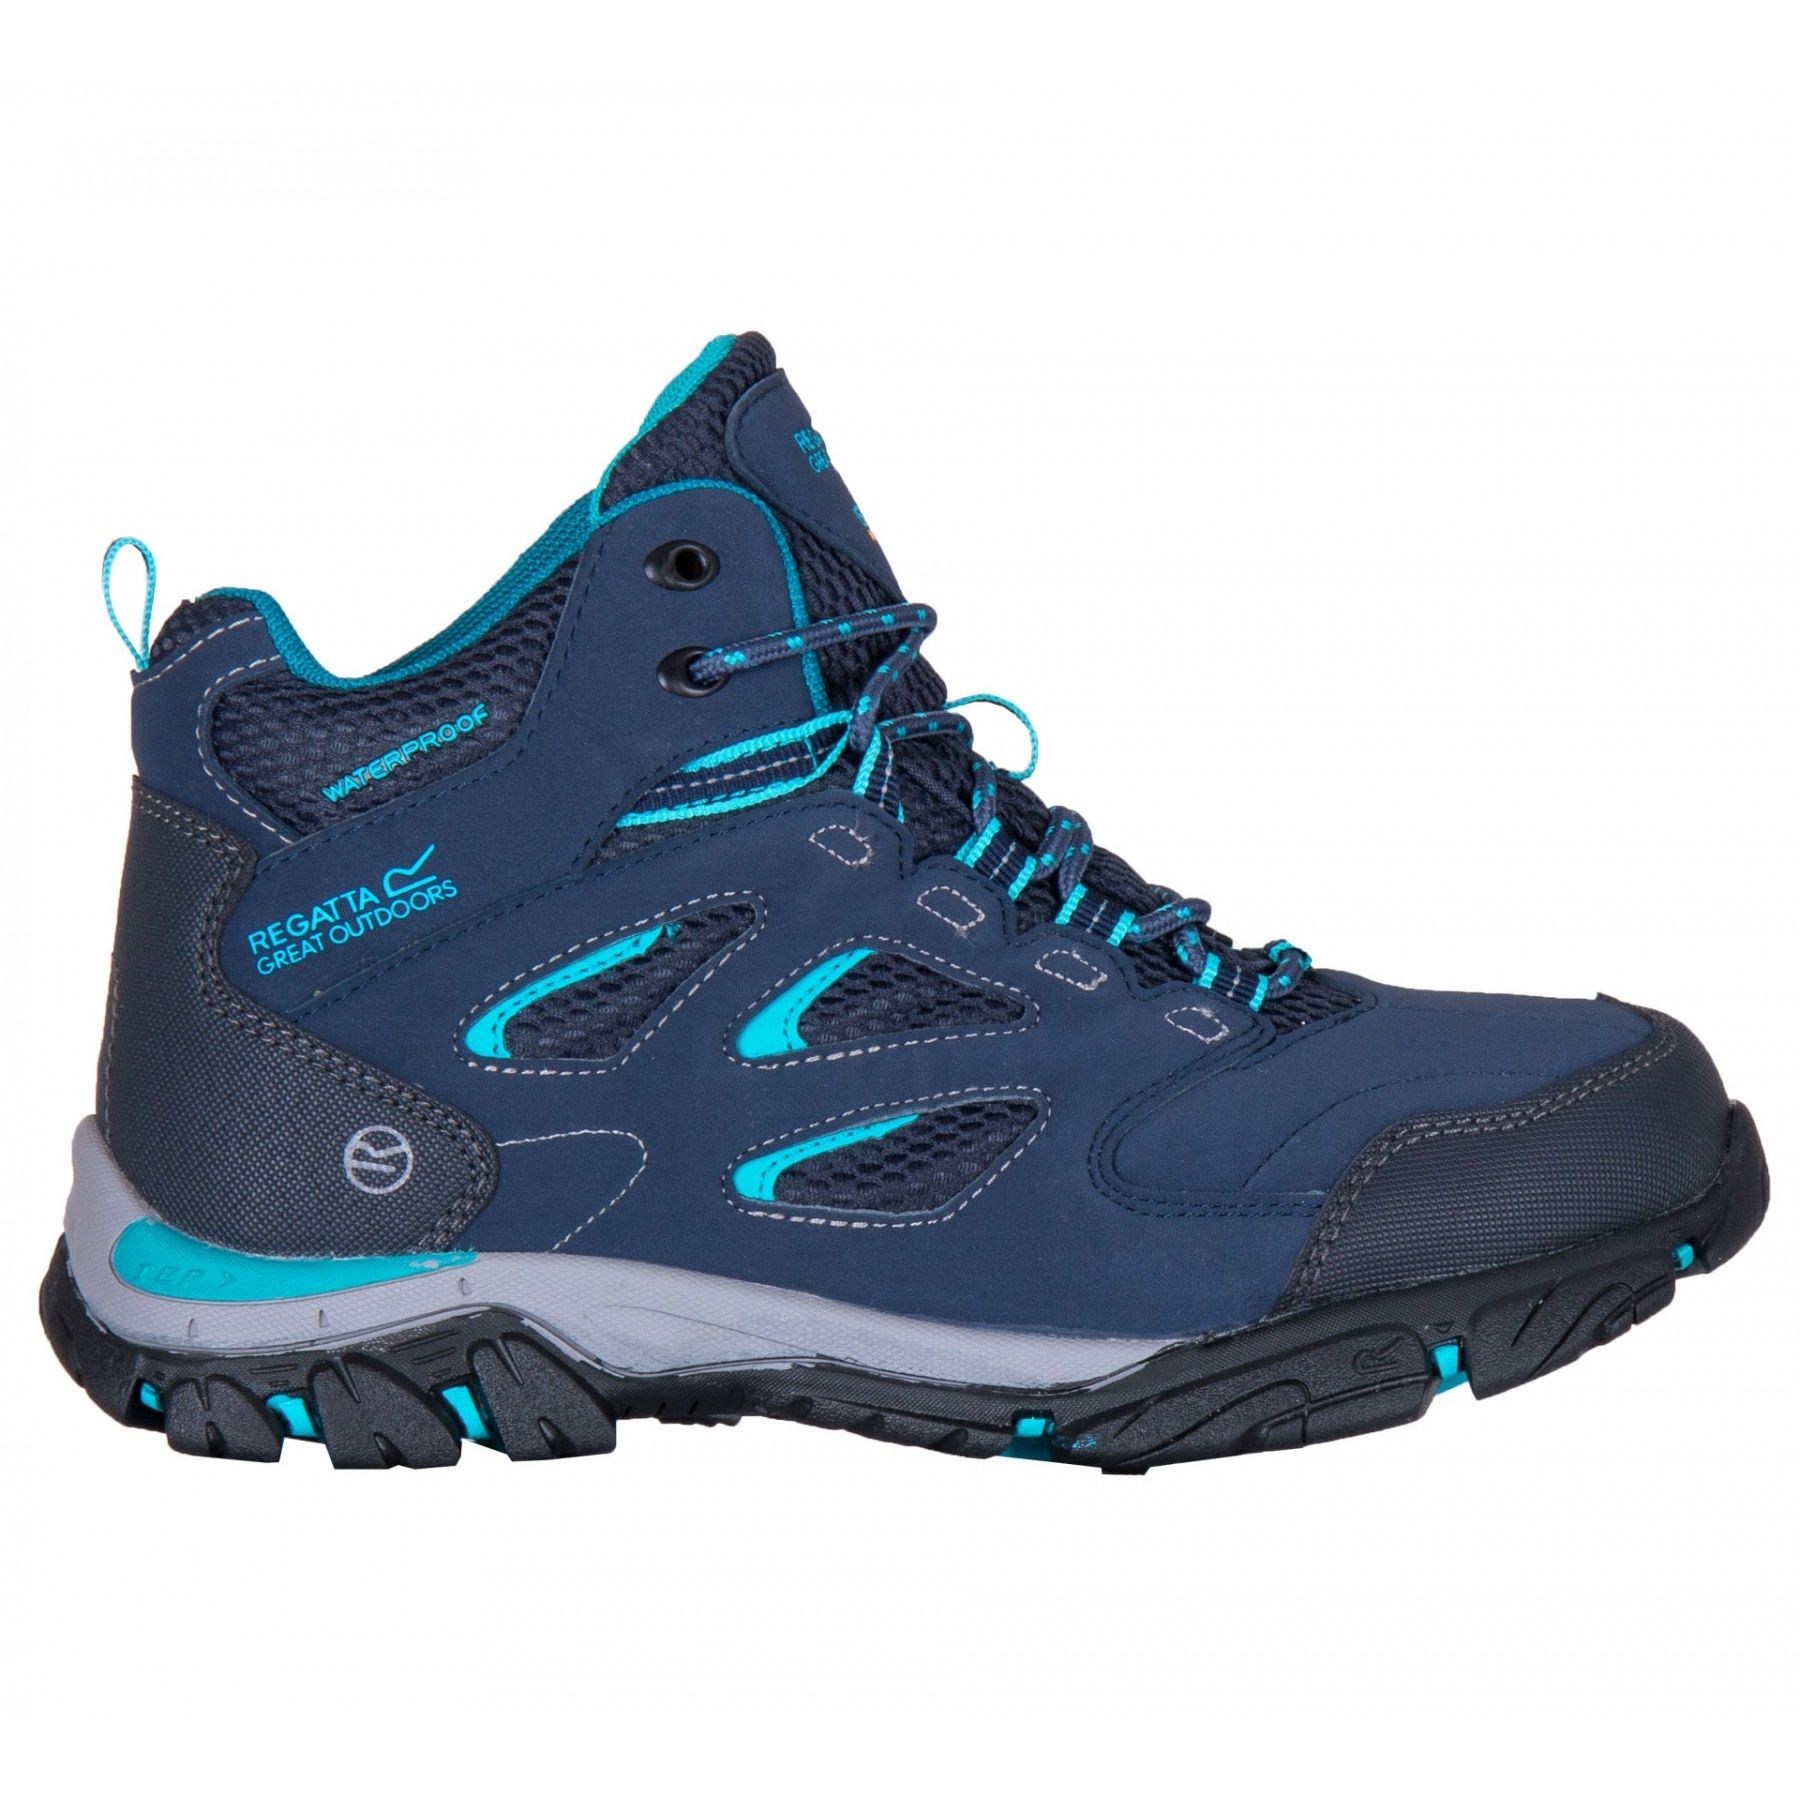 Womens hiking boots made of Isotex waterproof material. Seam sealed with internal membrane bootee liner. Hydropel water resistant technology. Deep padded neoprene collar and mesh tongue. Rubberised toe and heel bumpers. New and improved fit with precise heel hold and generous toe room. EVA comfort footbed. Stabilising shank technology. Internal EVA Pocket for underfoot comfort and reduced weight. New rubber outsole with self cleaning and angled lugs for propulsion, breaking and self cleaning properties. 15% Polyester, 85% Polyurathane.